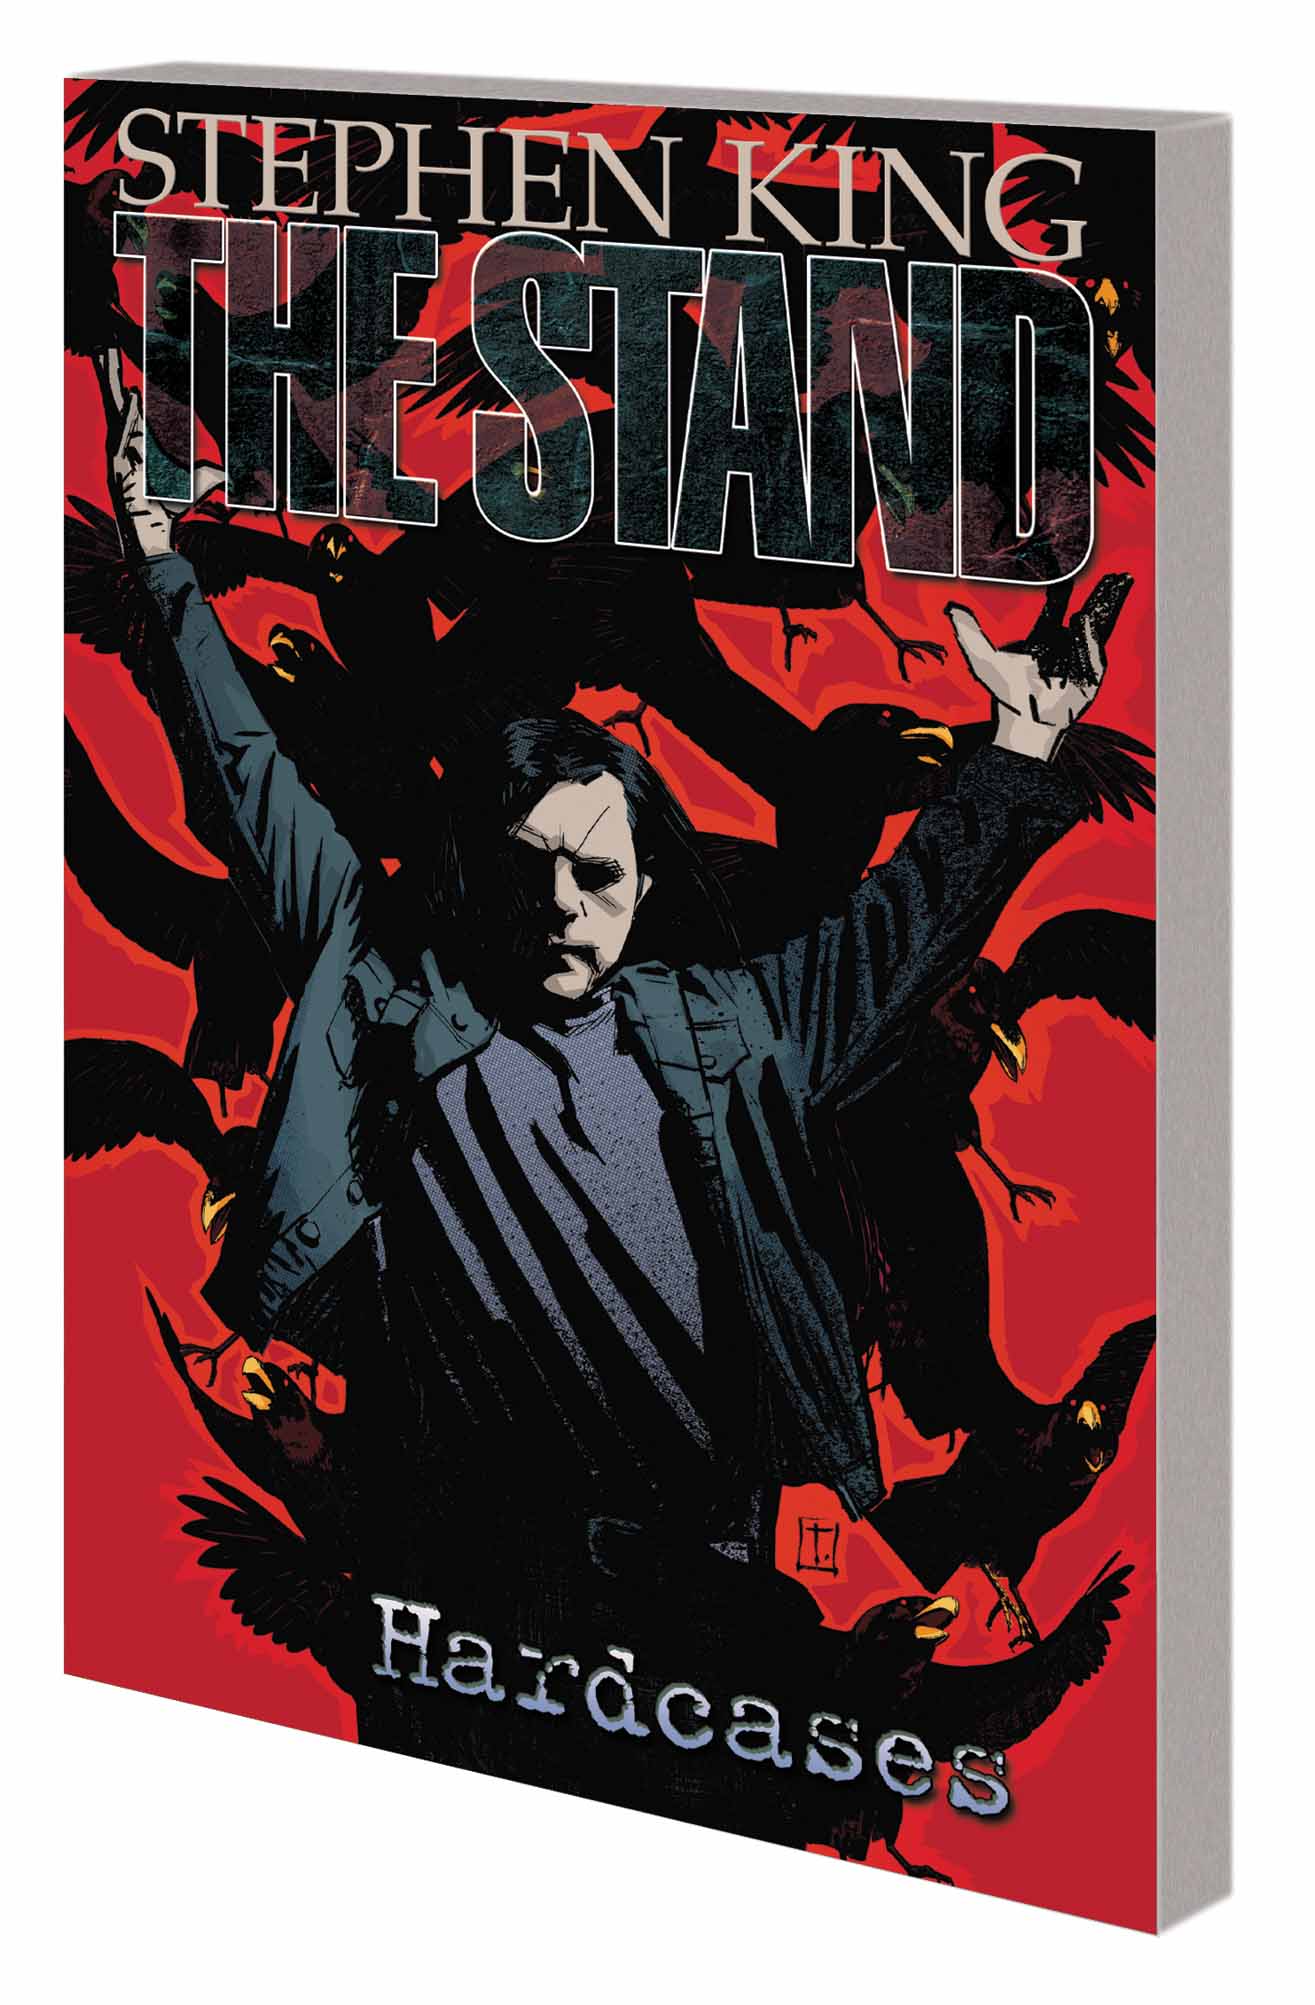 The Stand Vol. 4: Hardcases TPB (Trade Paperback)